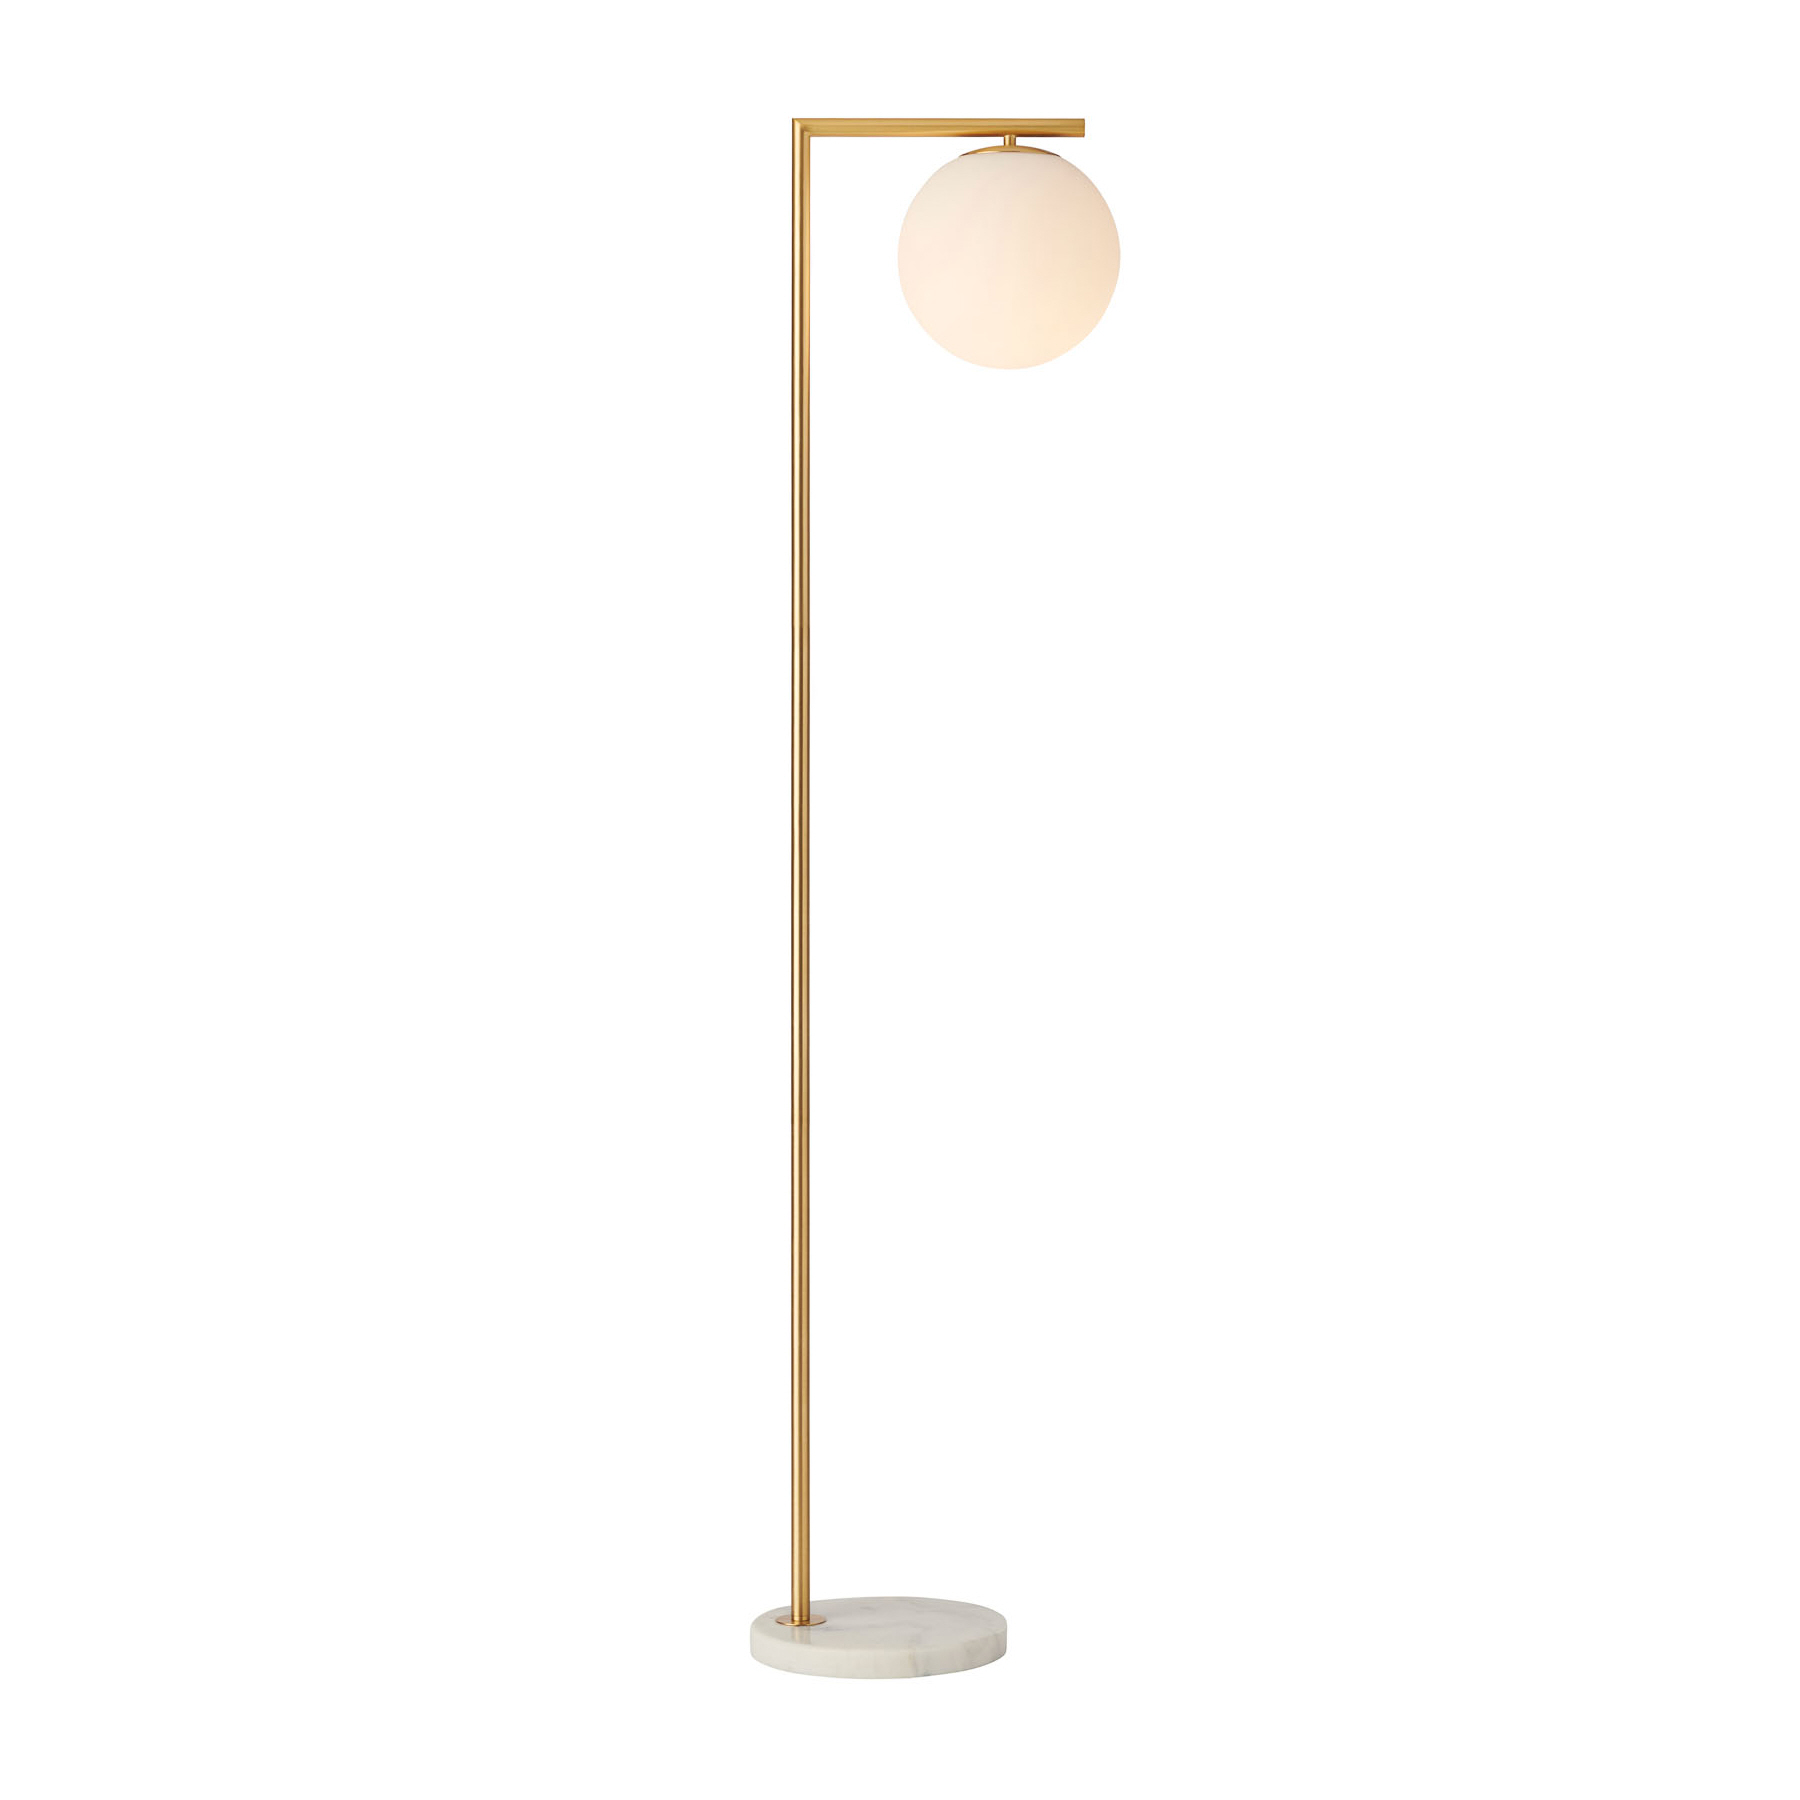 Remi Brass Floor Lamp with White Shade